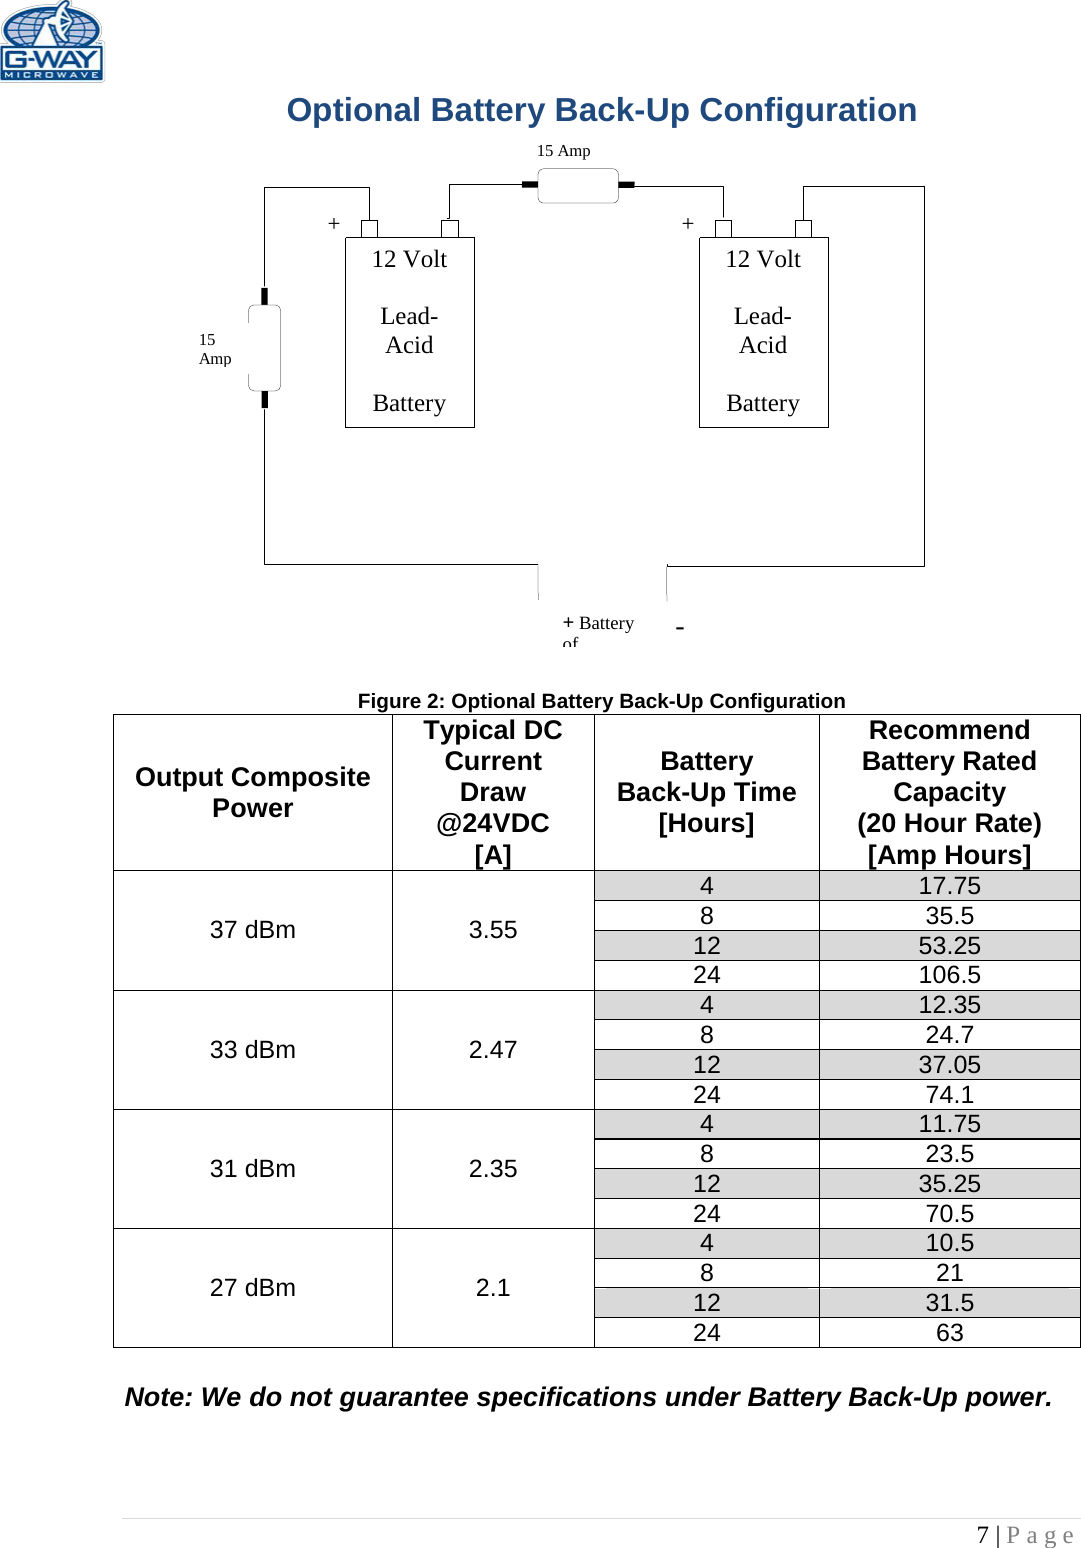   7 | Page  15 Amp  15 Amp       12 Volt  Lead-Acid  Battery  12 Volt  Lead-Acid  Battery  + + + Battery of   - Optional Battery Back-Up Configuration                  Figure 2: Optional Battery Back-Up Configuration Output Composite Power Typical DC Current  Draw @24VDC [A] Battery Back-Up Time [Hours] Recommend Battery Rated Capacity (20 Hour Rate) [Amp Hours] 37 dBm 3.55 4 17.75 8 35.5 12 53.25 24 106.5 33 dBm 2.47 4 12.35 8 24.7 12 37.05 24 74.1 31 dBm  2.35 4 11.75 8 23.5 12 35.25 24 70.5 27 dBm 2.1 4 10.5 8 21 12 31.5 24 63  Note: We do not guarantee specifications under Battery Back-Up power.  